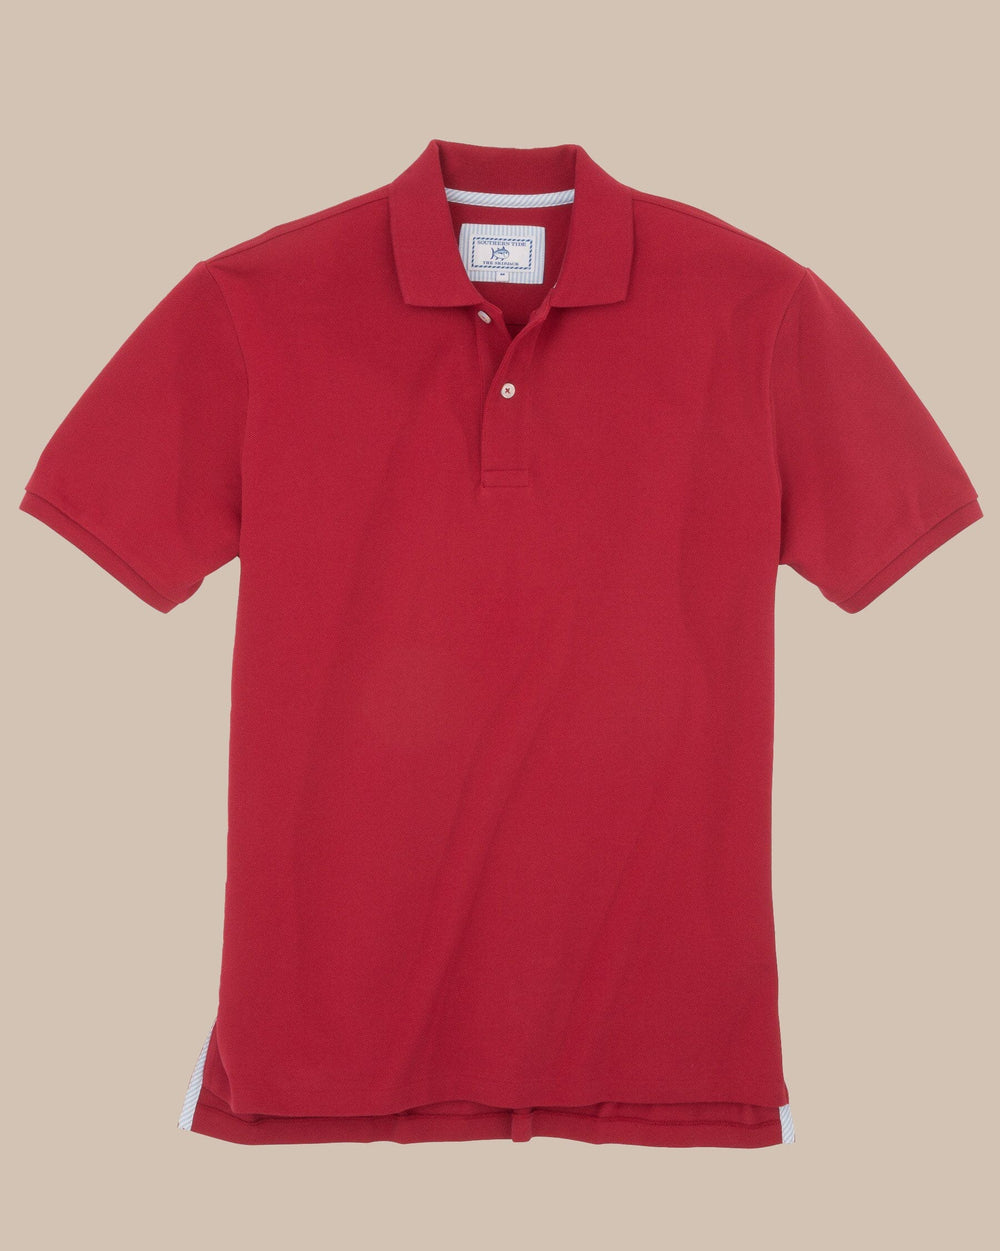 The front view of the Men's Red Skipjack Gameday Colors Polo Shirt by Southern Tide - Crimson